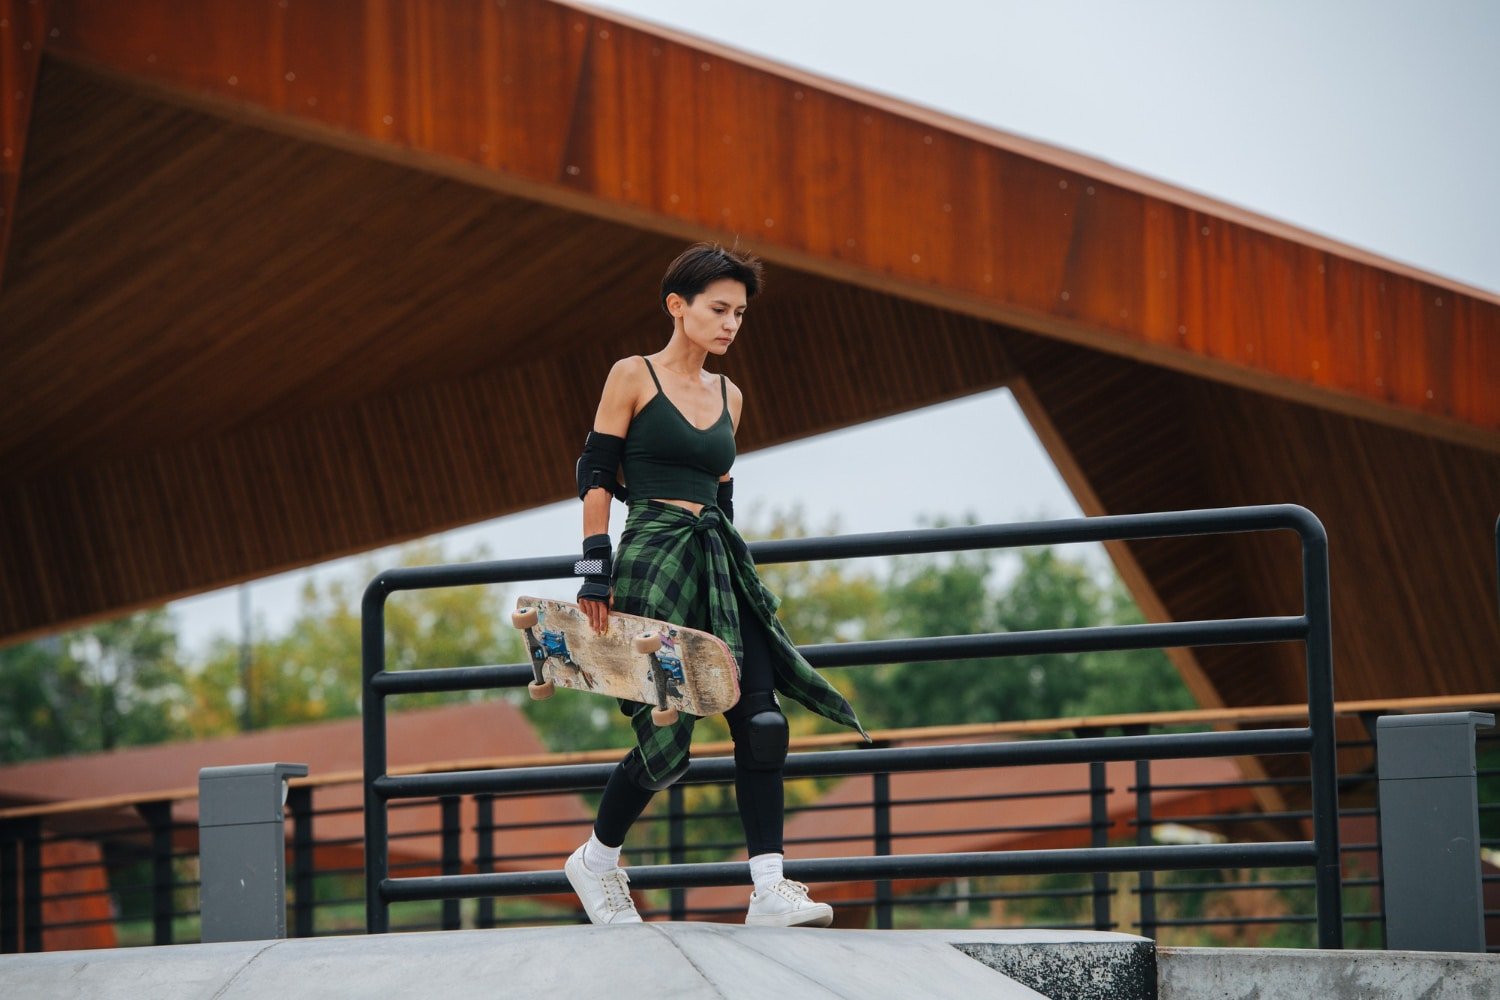 Gym+Coffee: Community-Driven Activewear for an Active Lifestyle